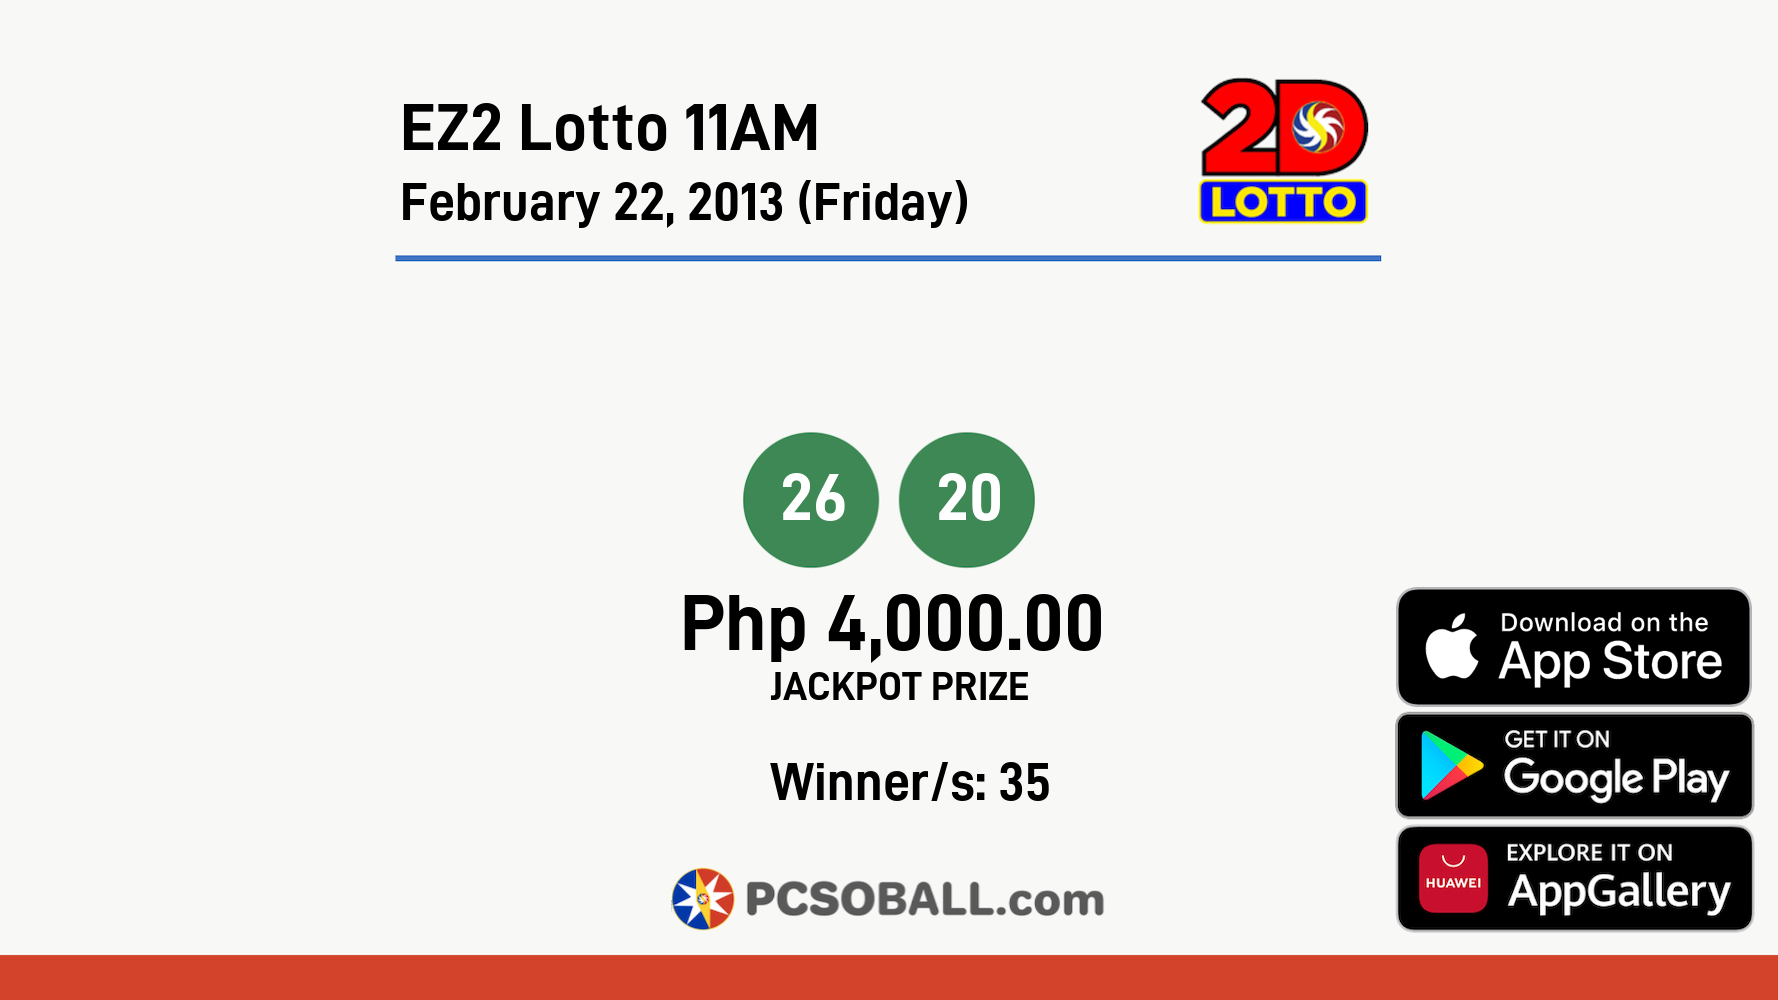 EZ2 Lotto 11AM February 22, 2013 (Friday) Result